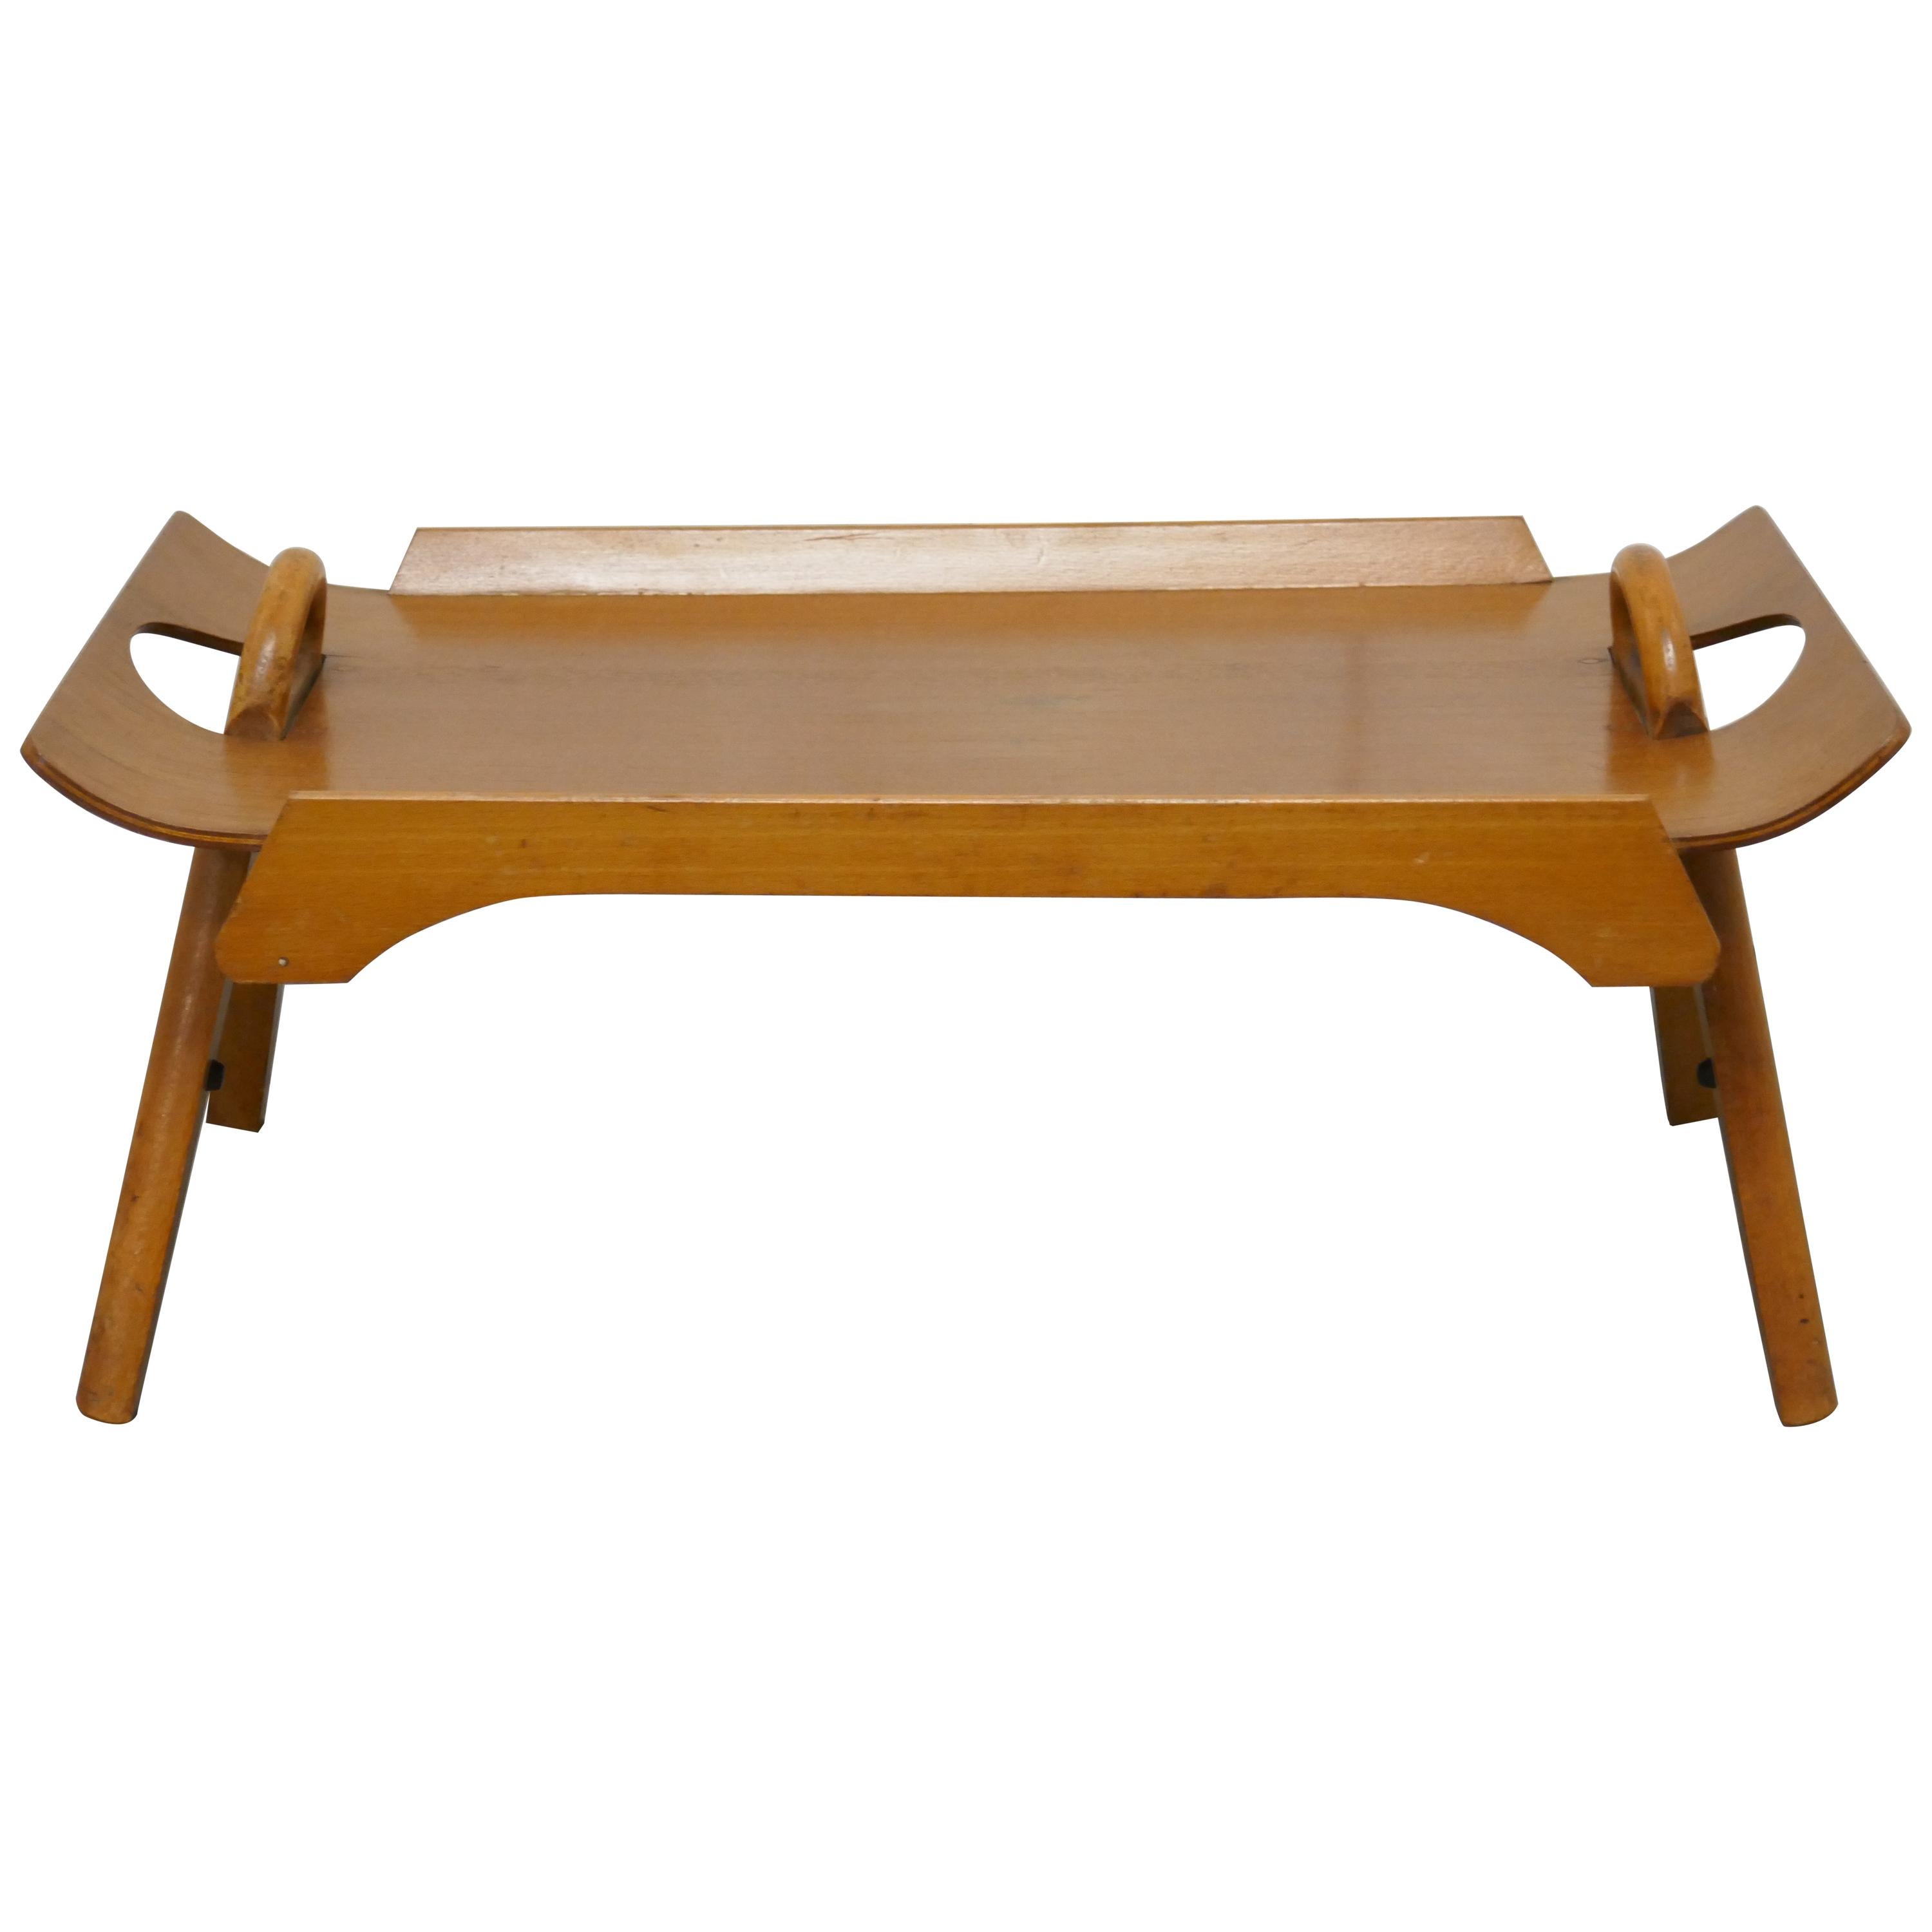 1950s Centurion Teak Breakfast Bed Tray Table by Paragon